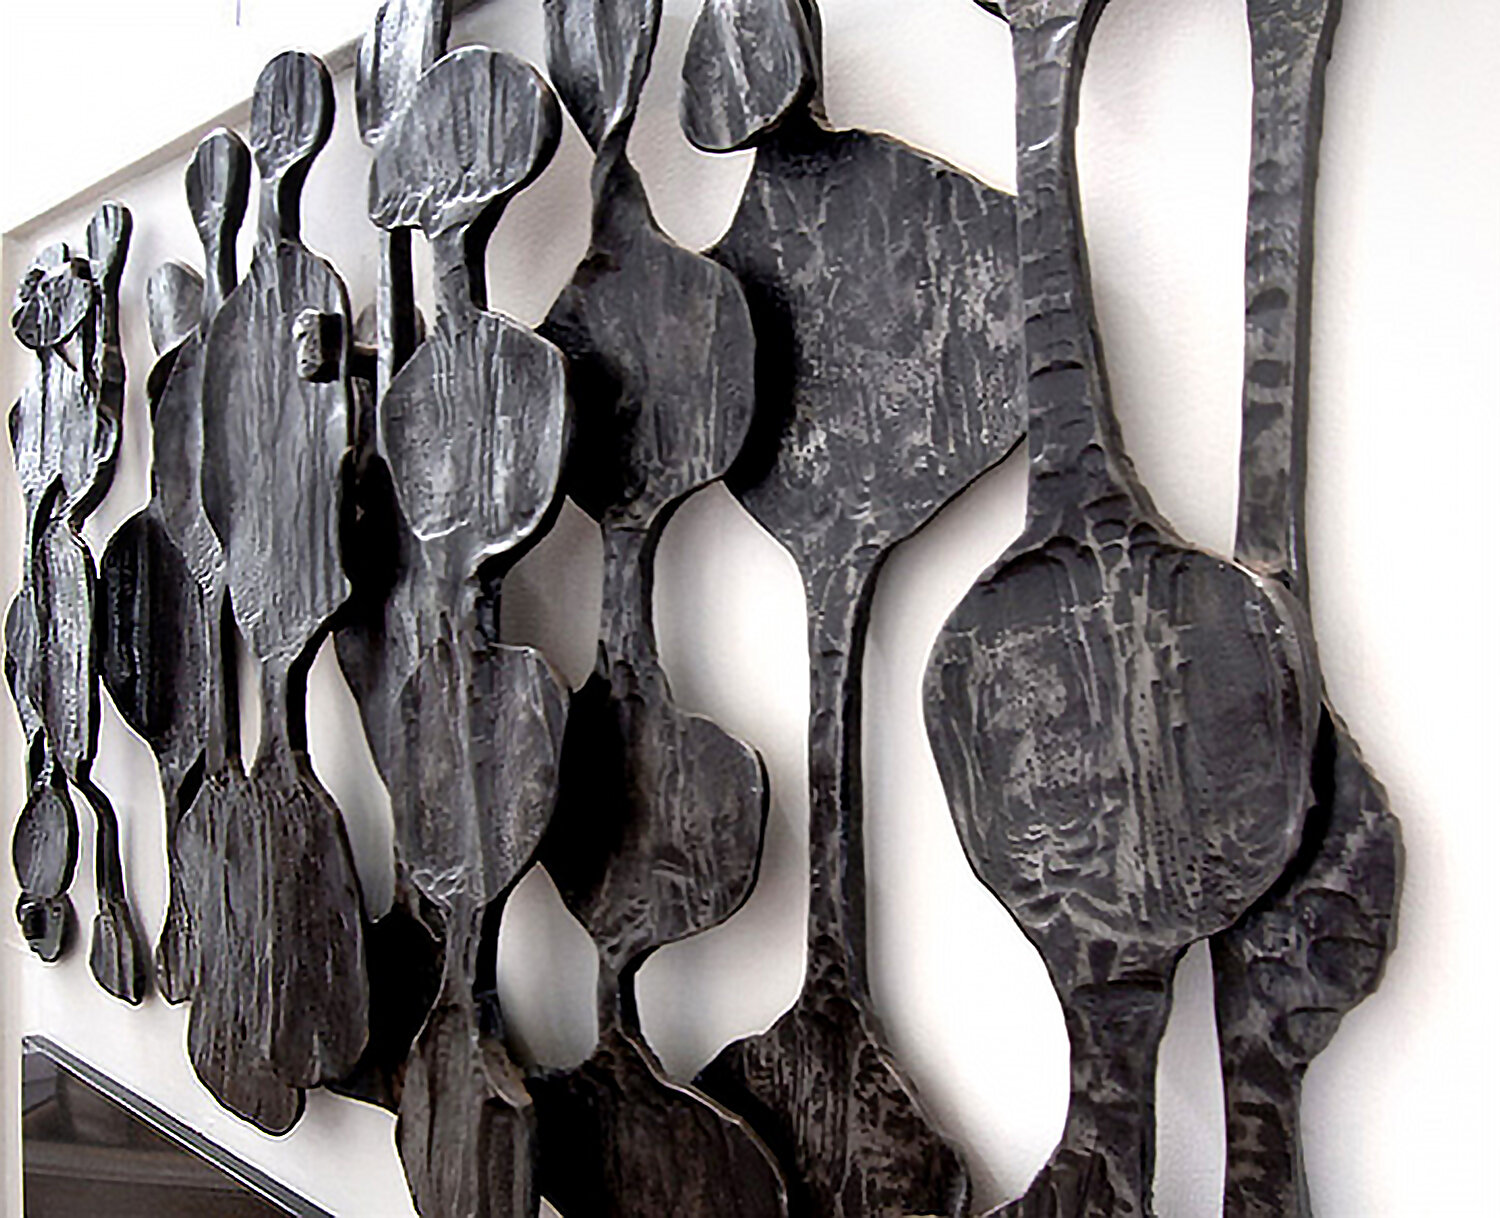  Detail of African Art-inspired wall relief sculpture. This residential artwork of forged steel was designed by Dimitri Gerakaris to resonate with the room full of antique African art. 